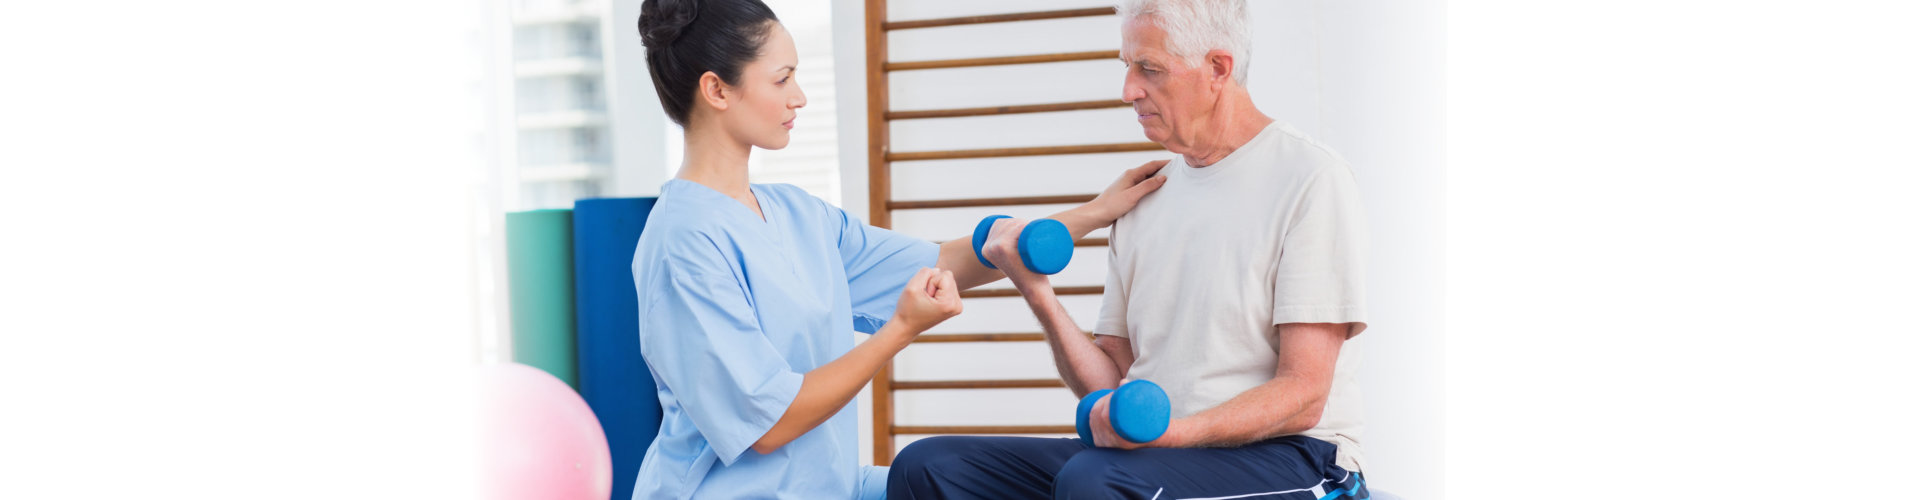 old man receiving physical therapy from young nurse